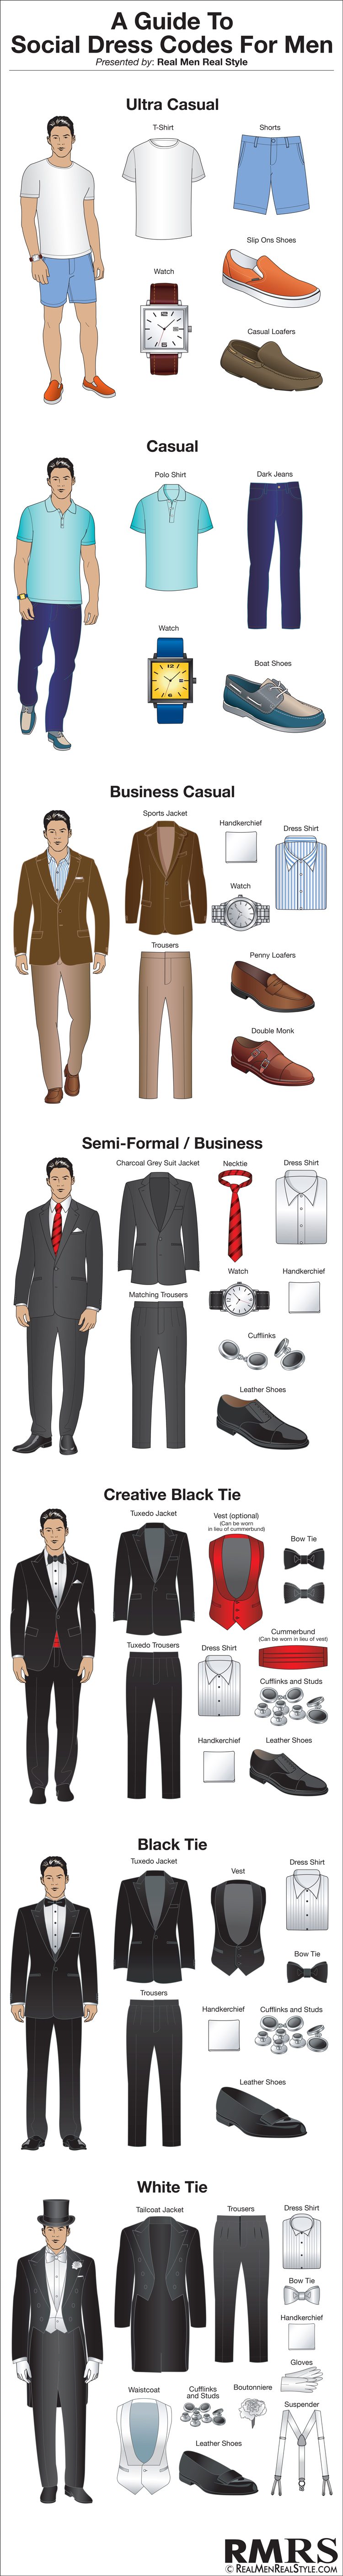 man's illustrated guide to different social dress codes